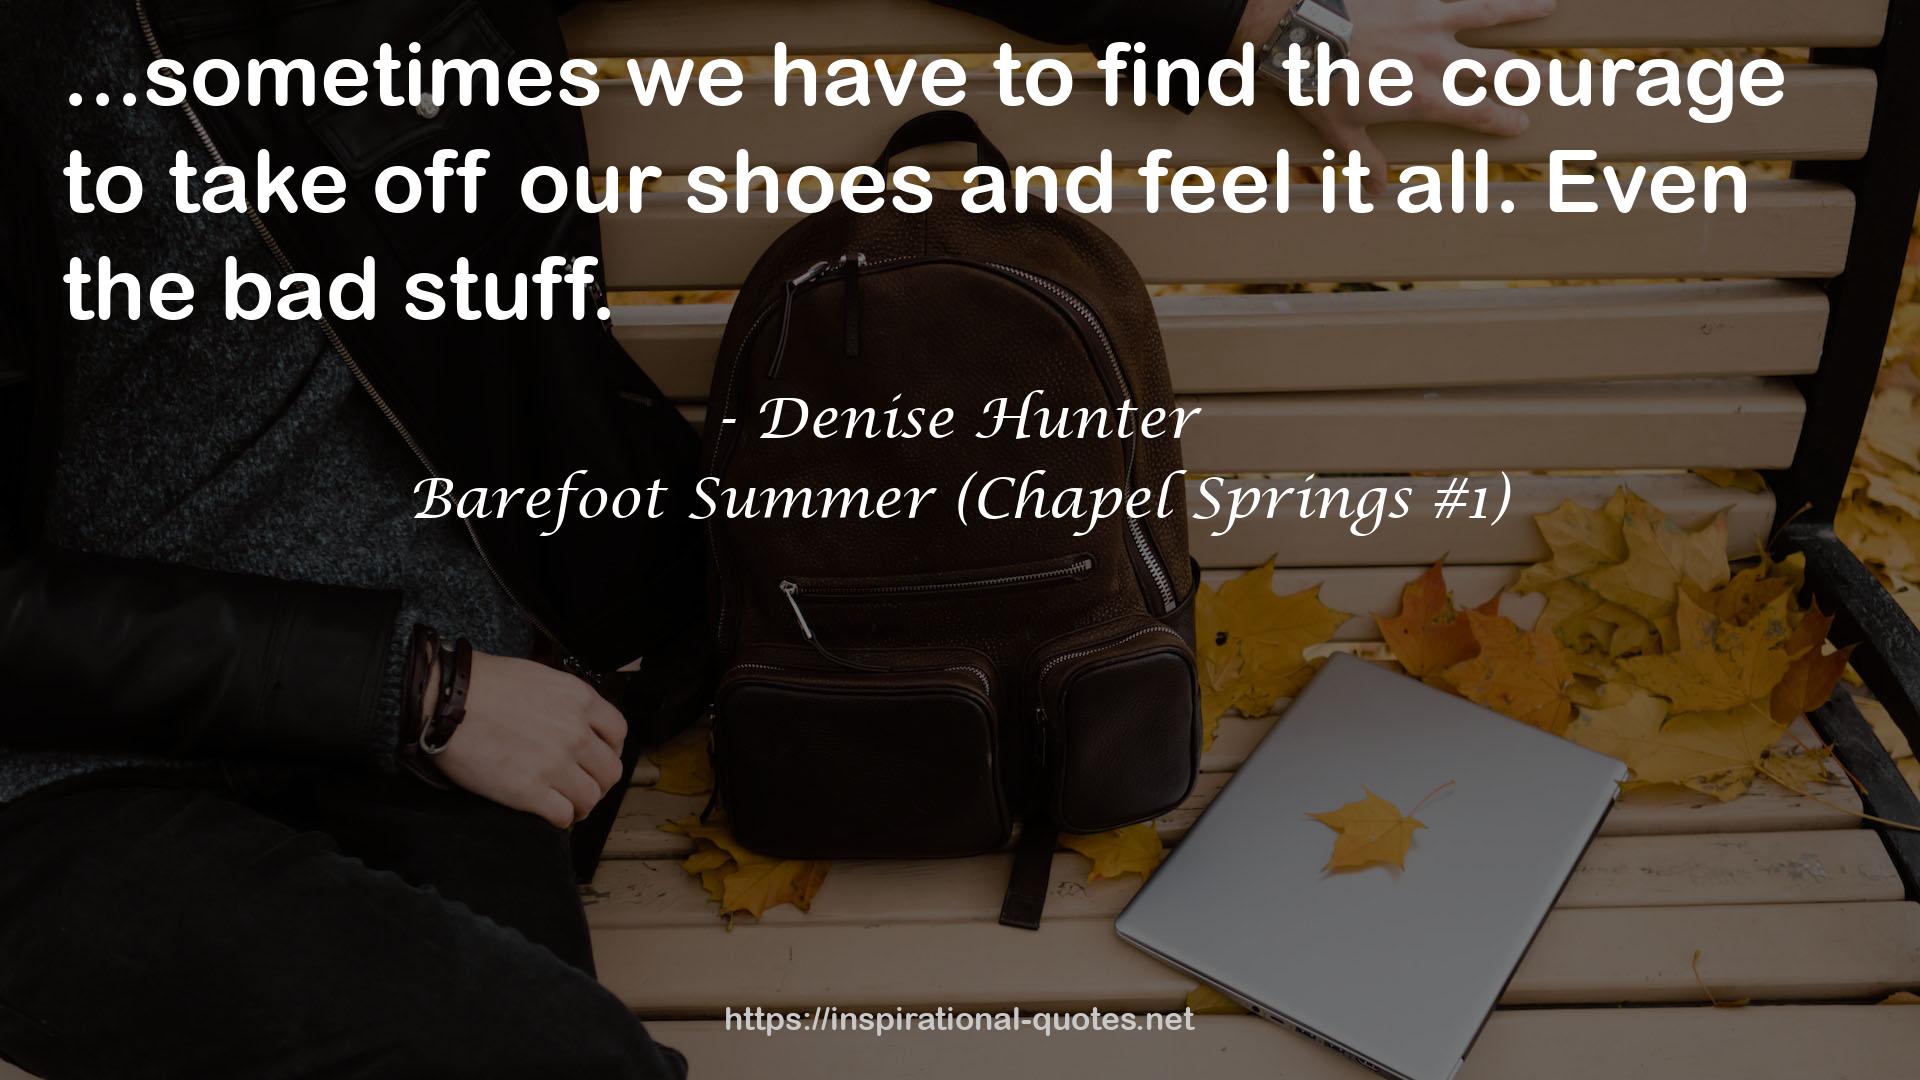 Barefoot Summer (Chapel Springs #1) QUOTES